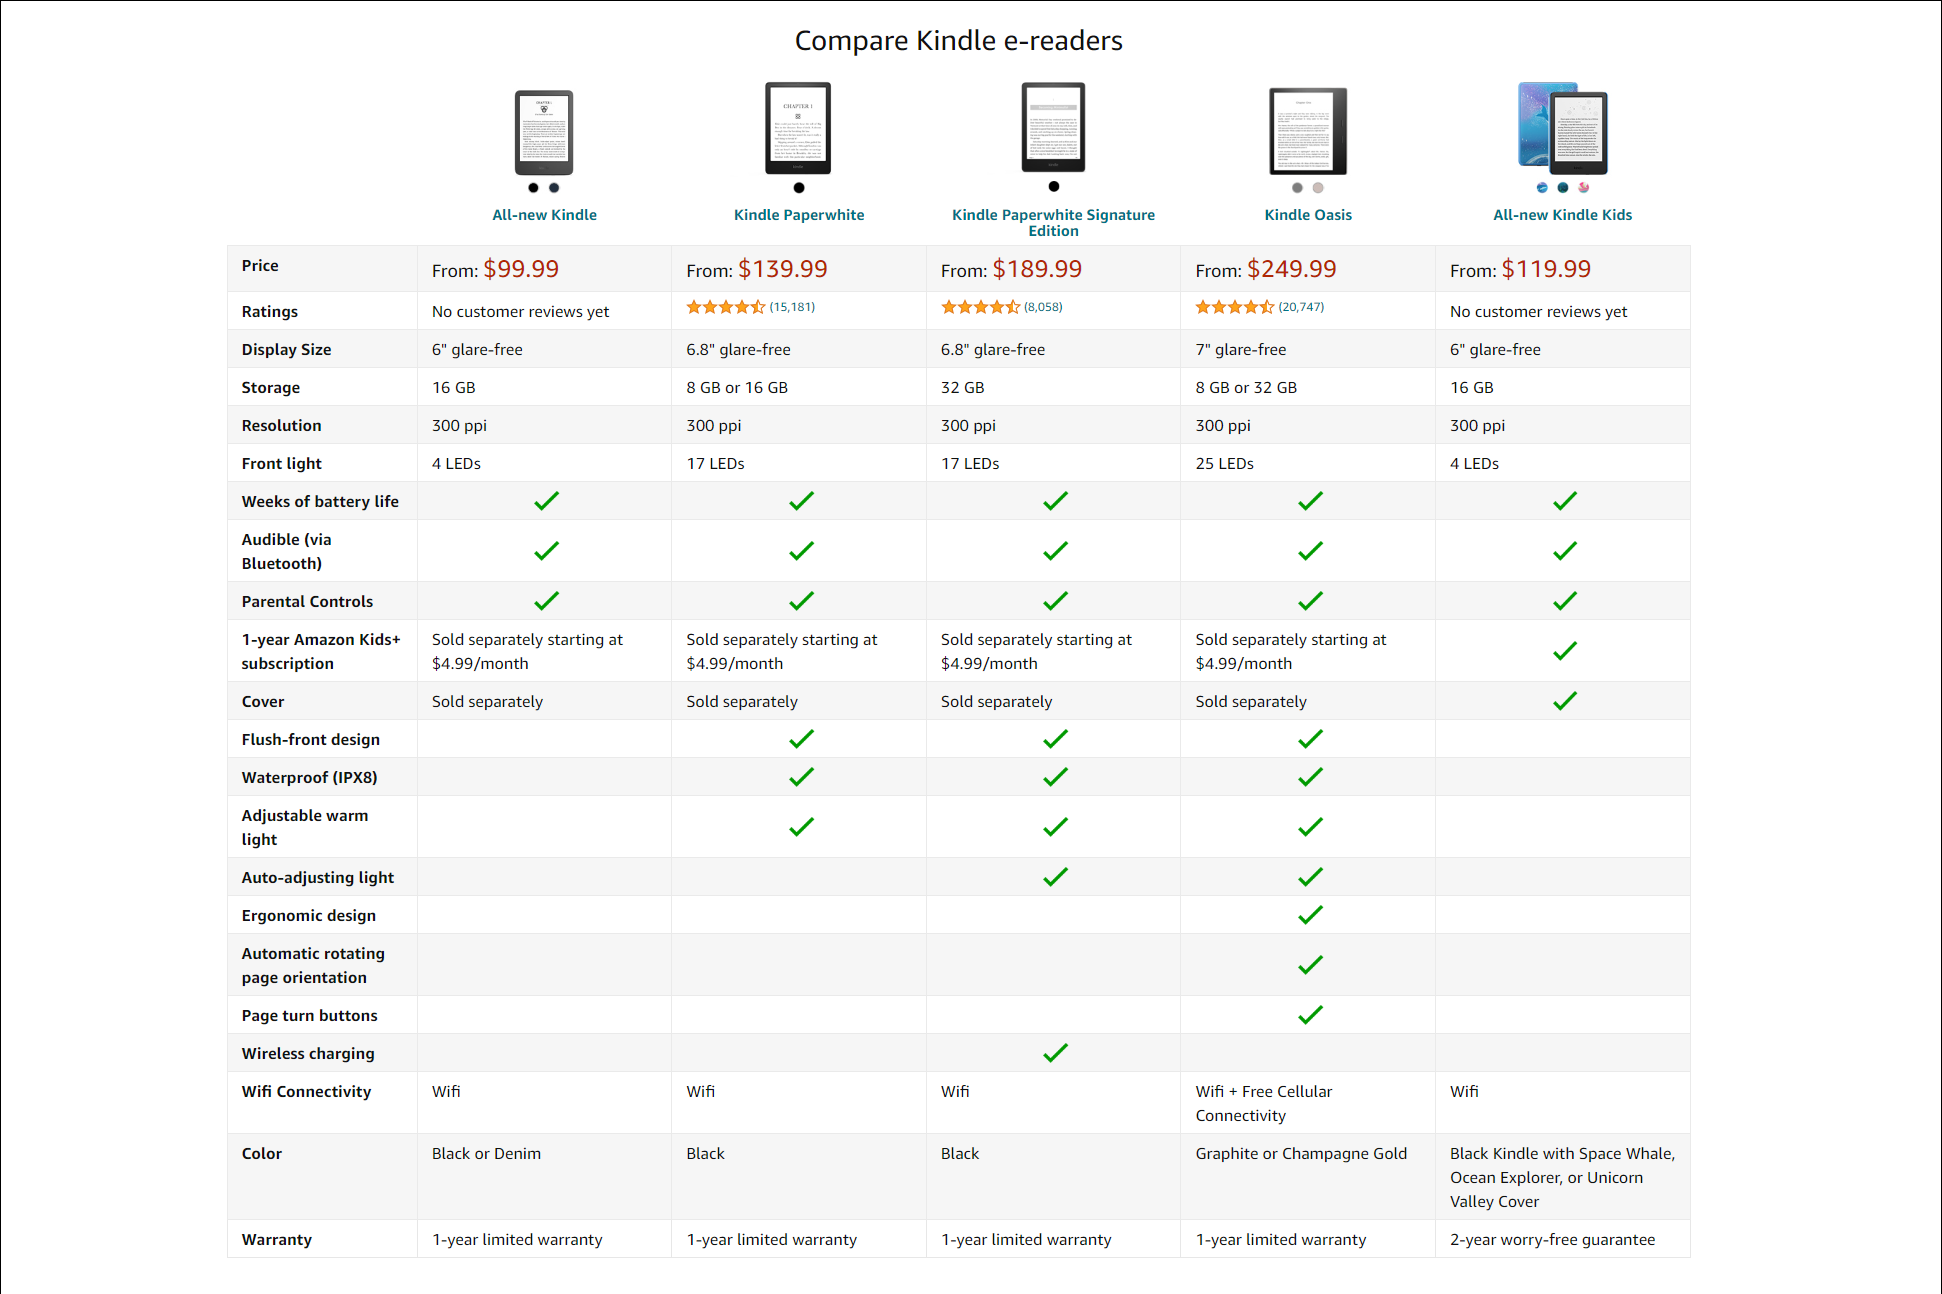 kindle versions compared